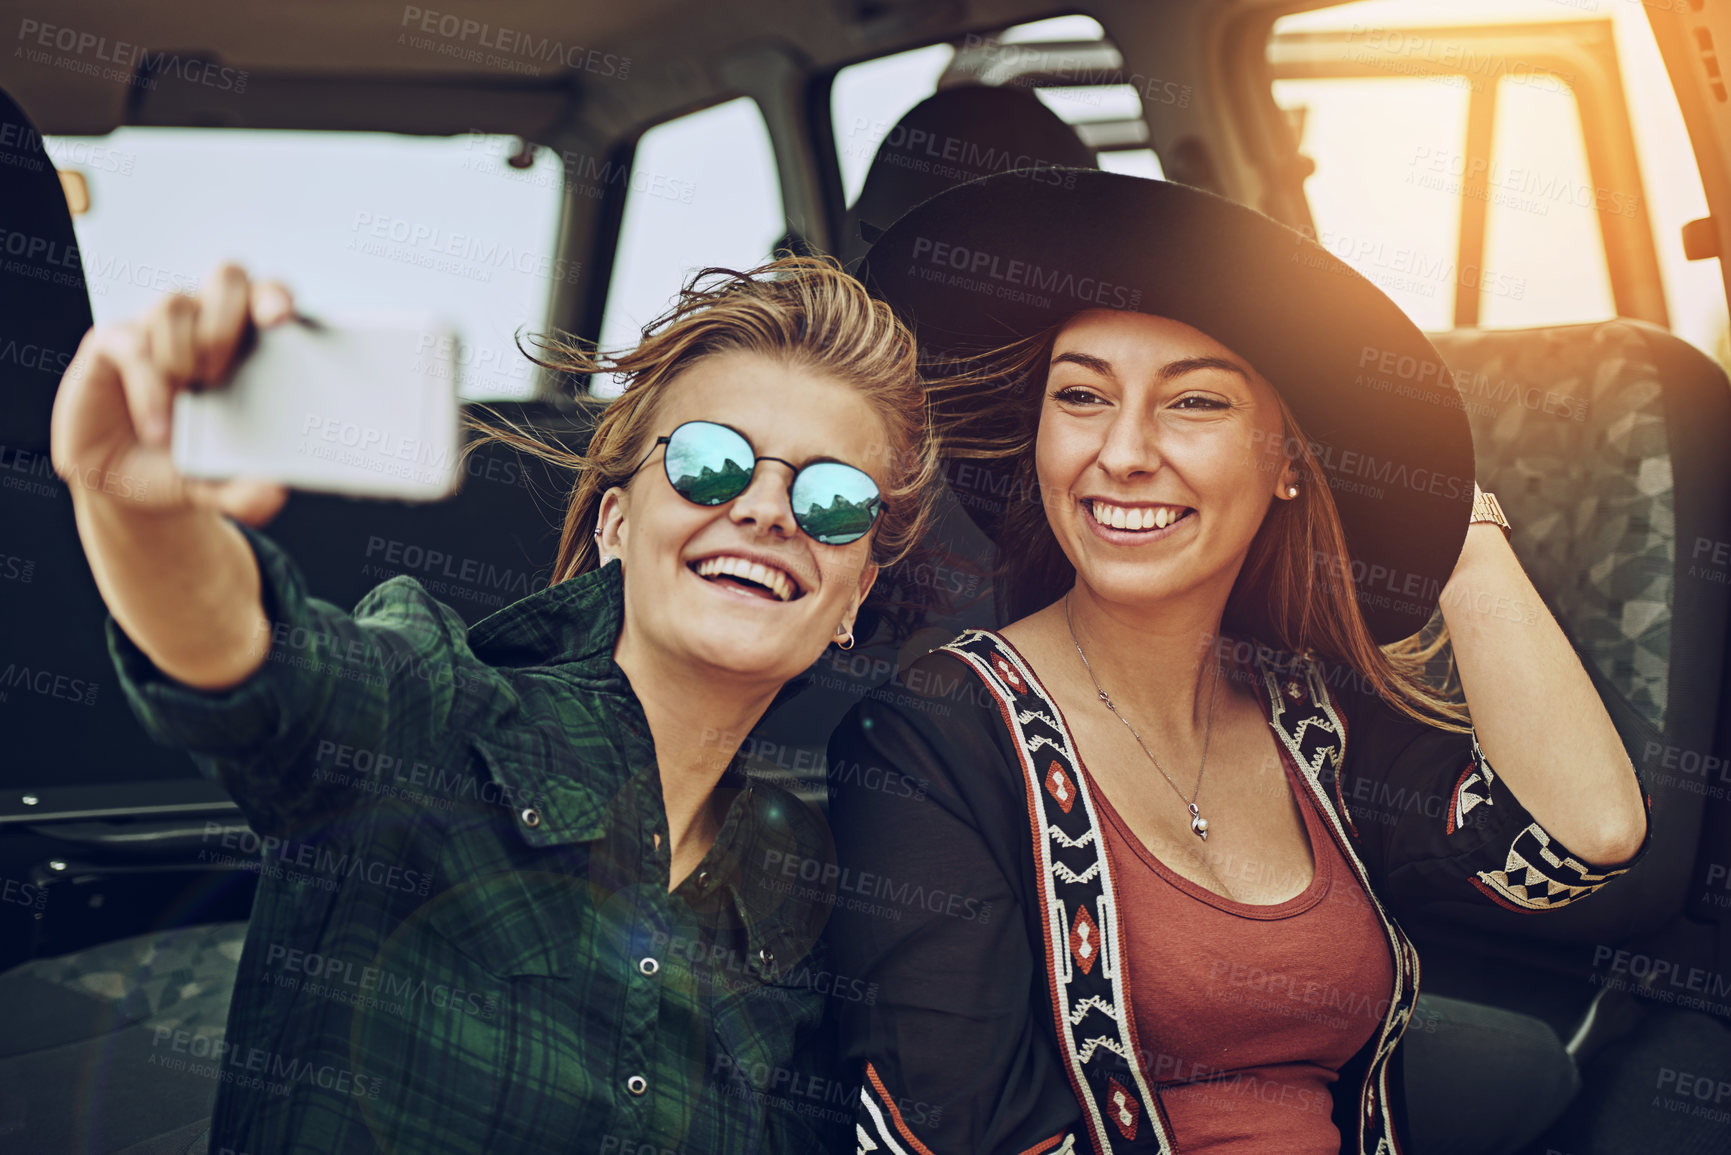 Buy stock photo Cropped shot of two young friends taking a selfie while on a roadtrip together